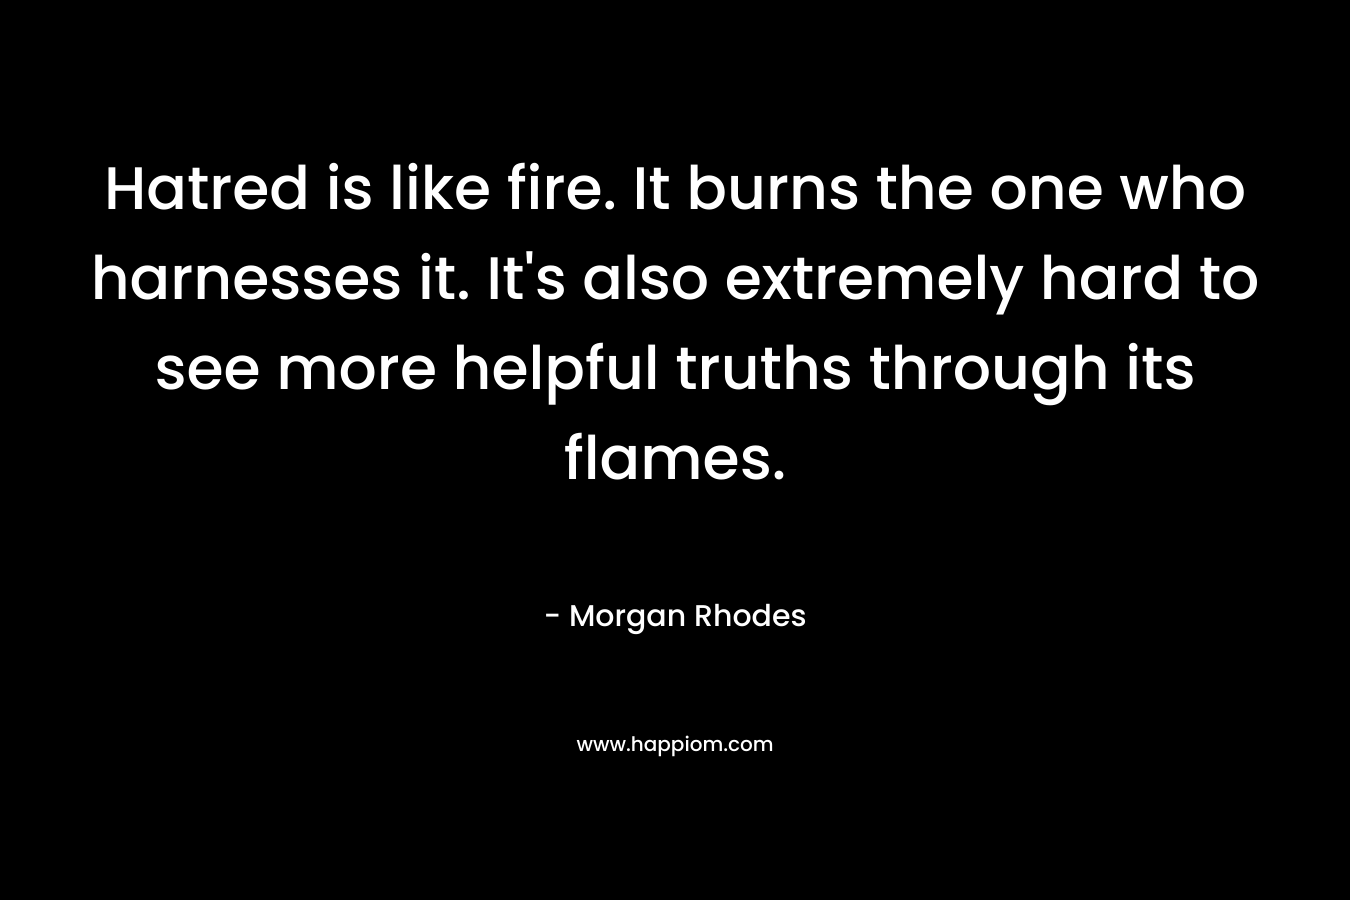 Hatred is like fire. It burns the one who harnesses it. It’s also extremely hard to see more helpful truths through its flames. – Morgan Rhodes